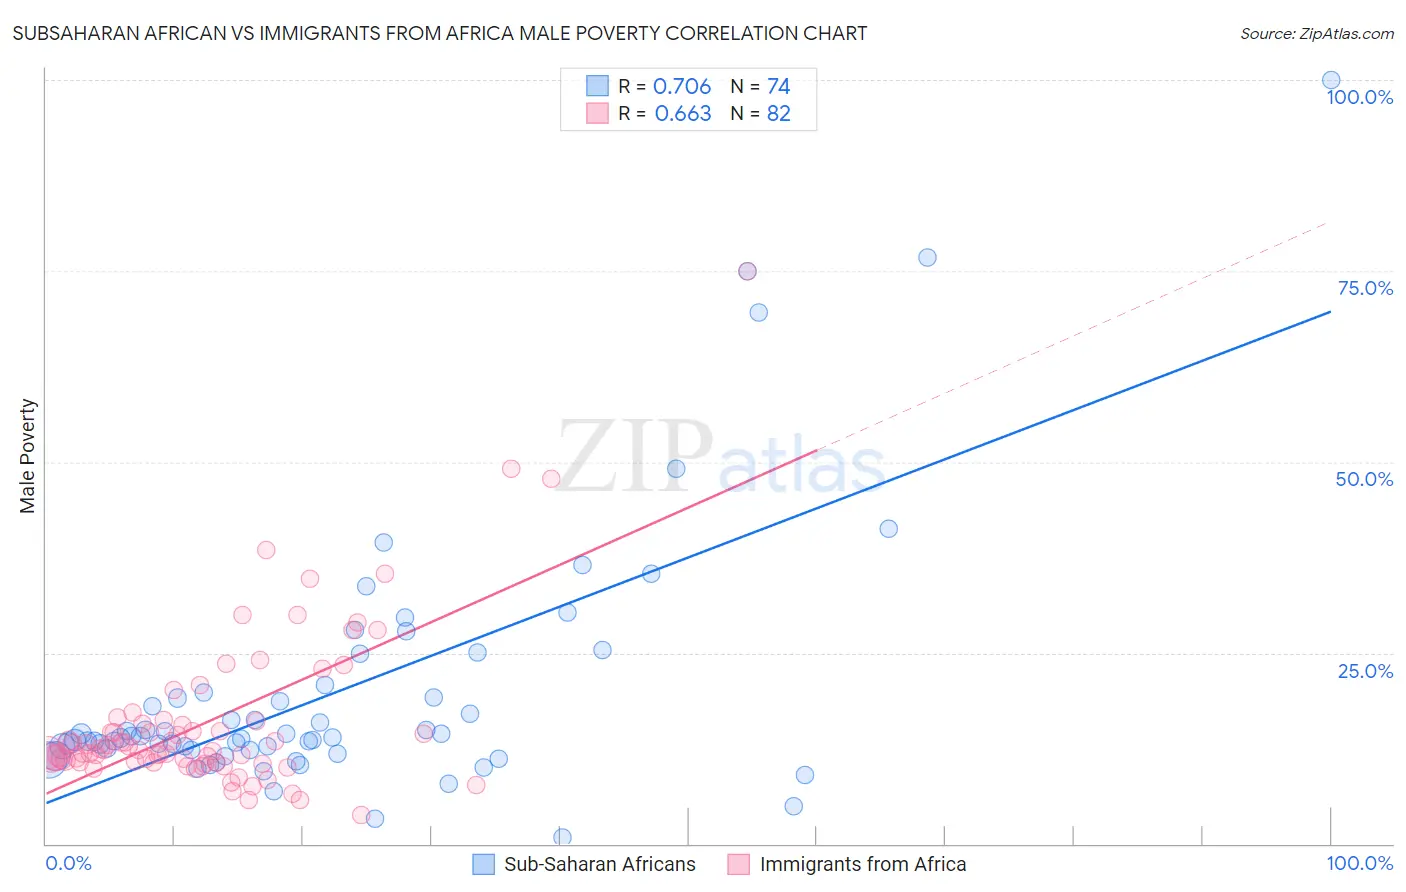 Subsaharan African vs Immigrants from Africa Male Poverty